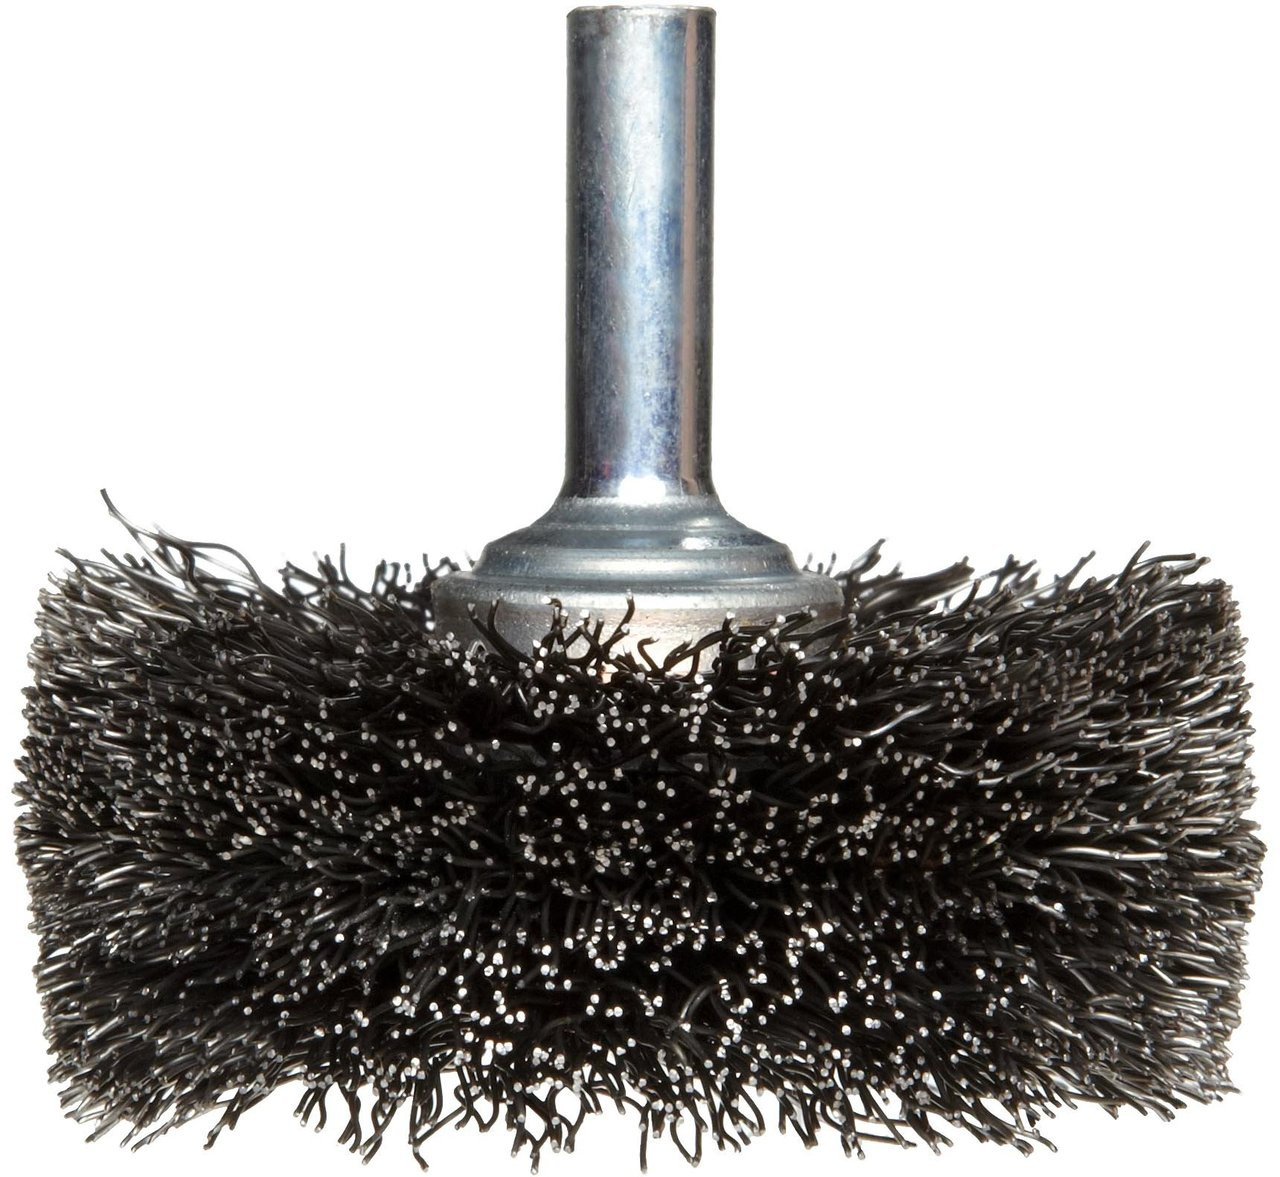 Crimped Wire-Wire Wheel Cup Brush – Industrial Tool Supply